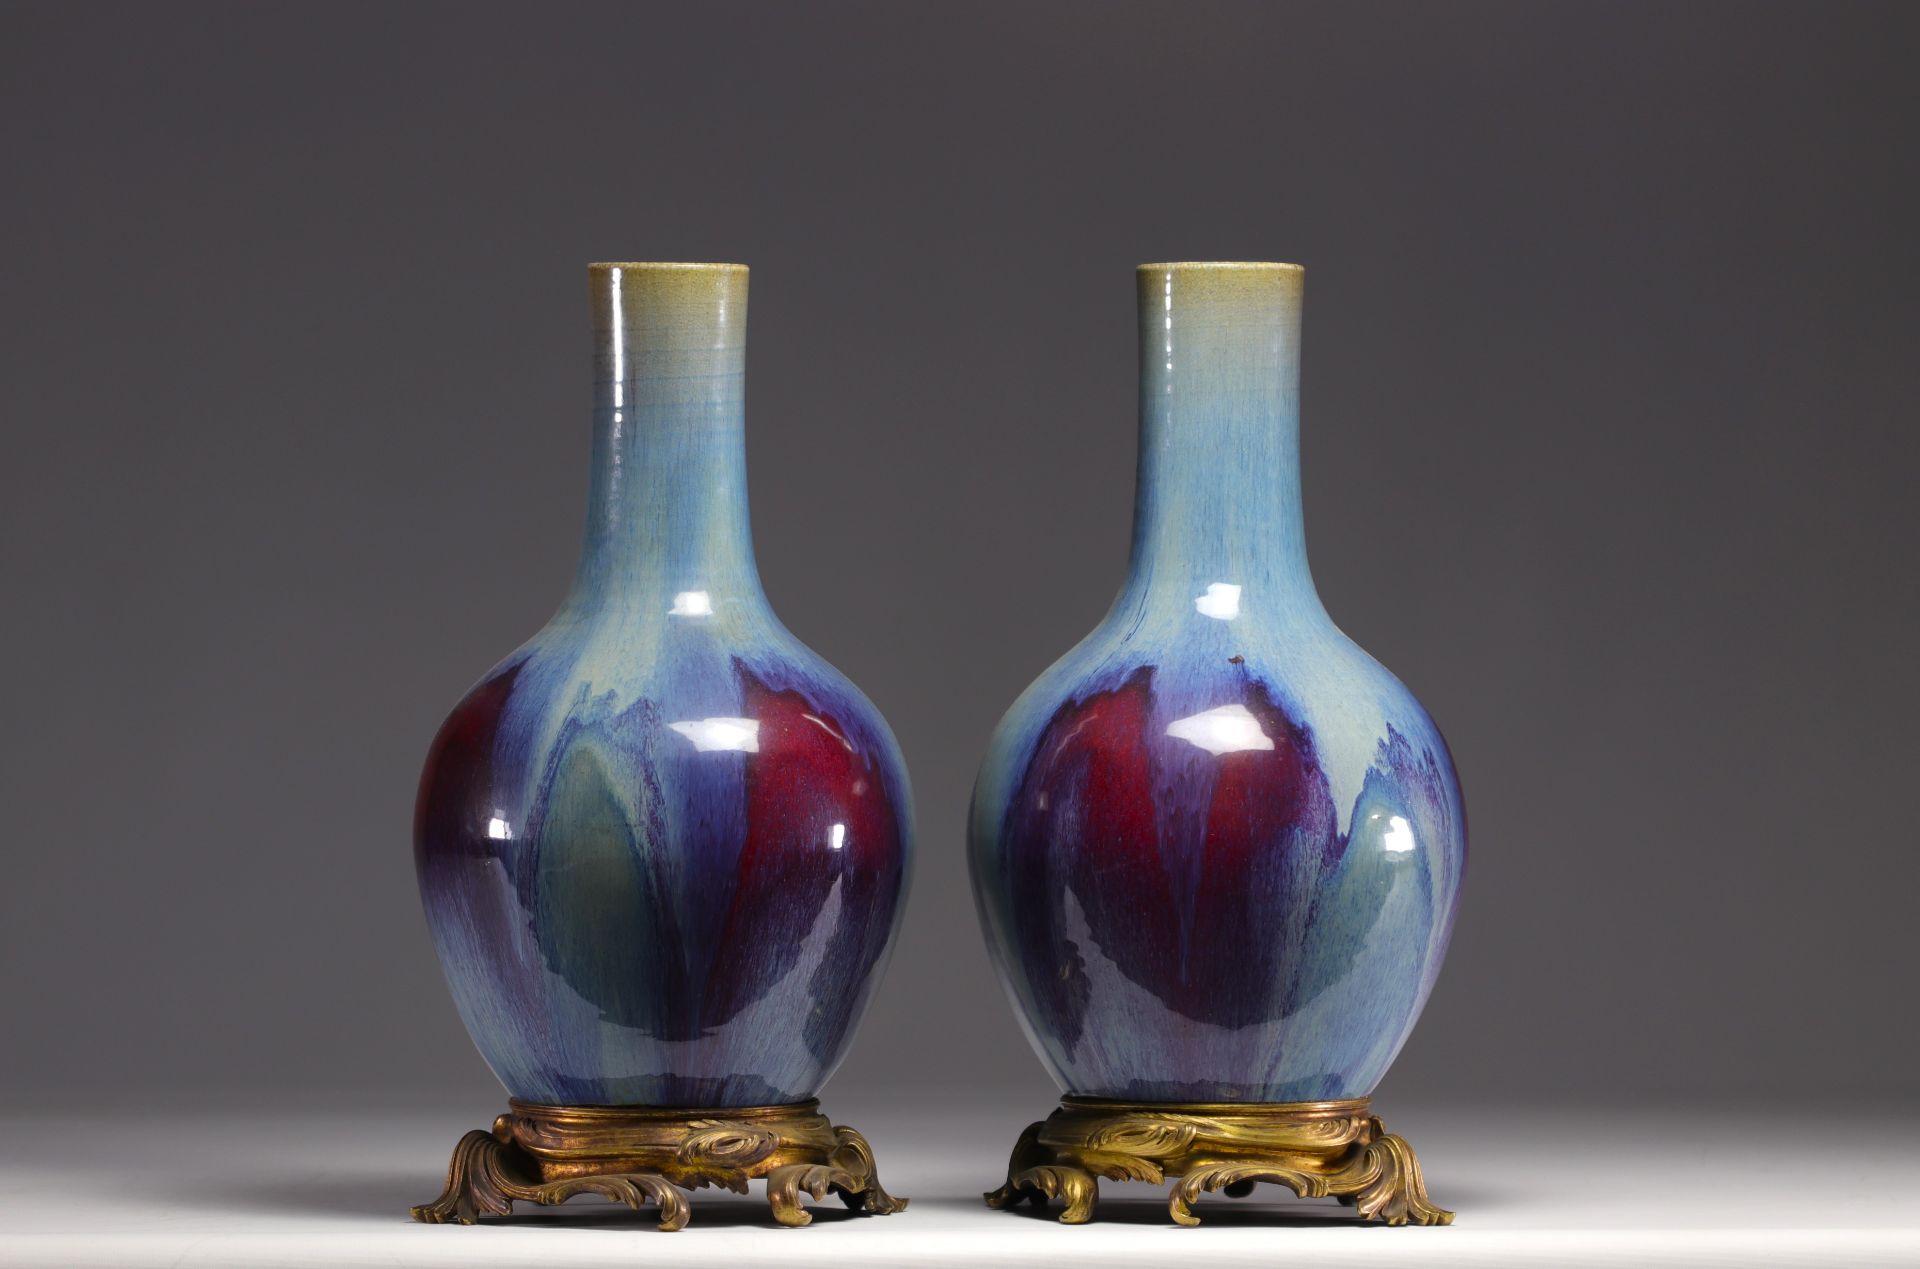 Rare pair of porcelain vases with flamed glaze mounted on bronze from 18th century